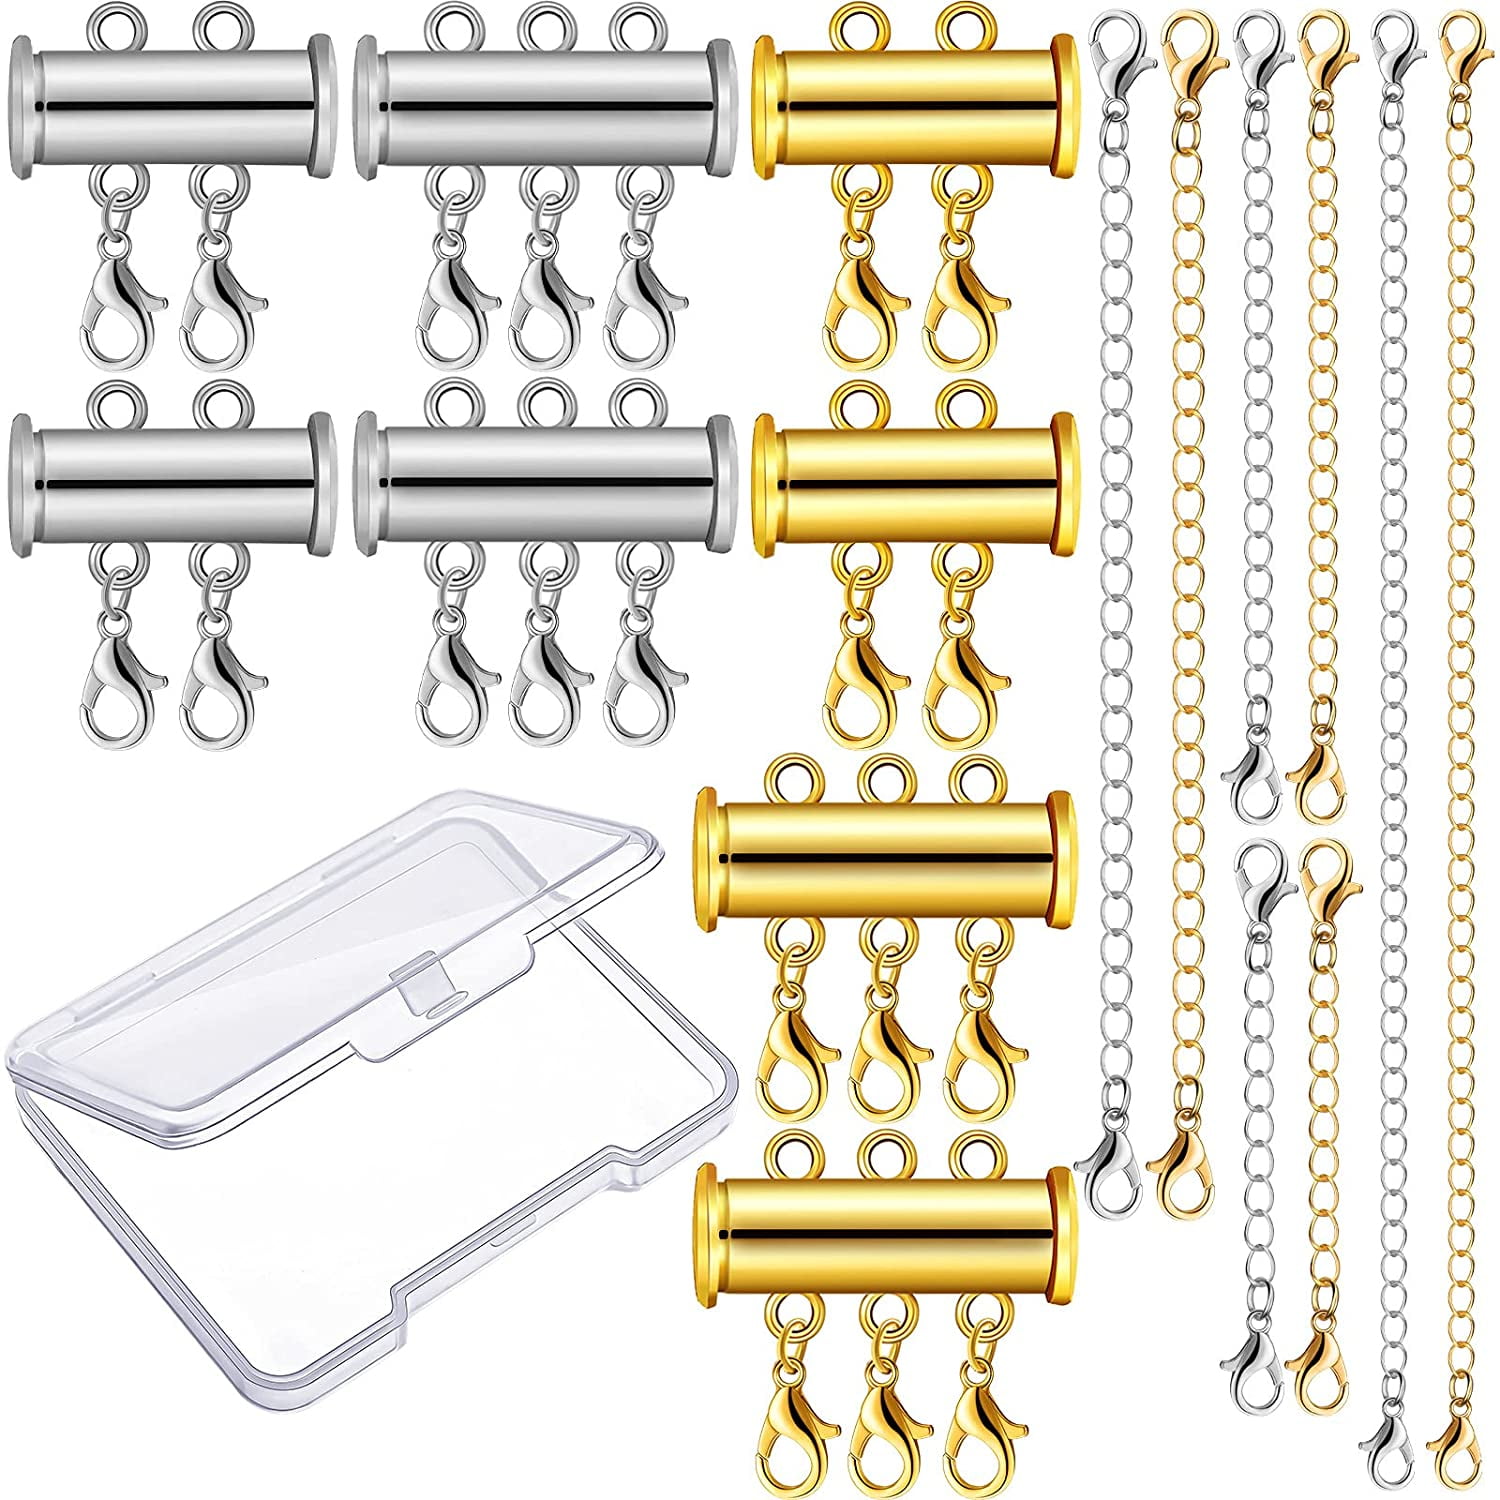 Layered Necklace Clasp, 4Pcs, 2 Size, Multi Strand Magnetic Jewelry Clasps, Necklace  Detangler Separator, Bracelet Connector Slide Tube Lock with Storage Box,  Gold & Silver, Bonus Safety Pins